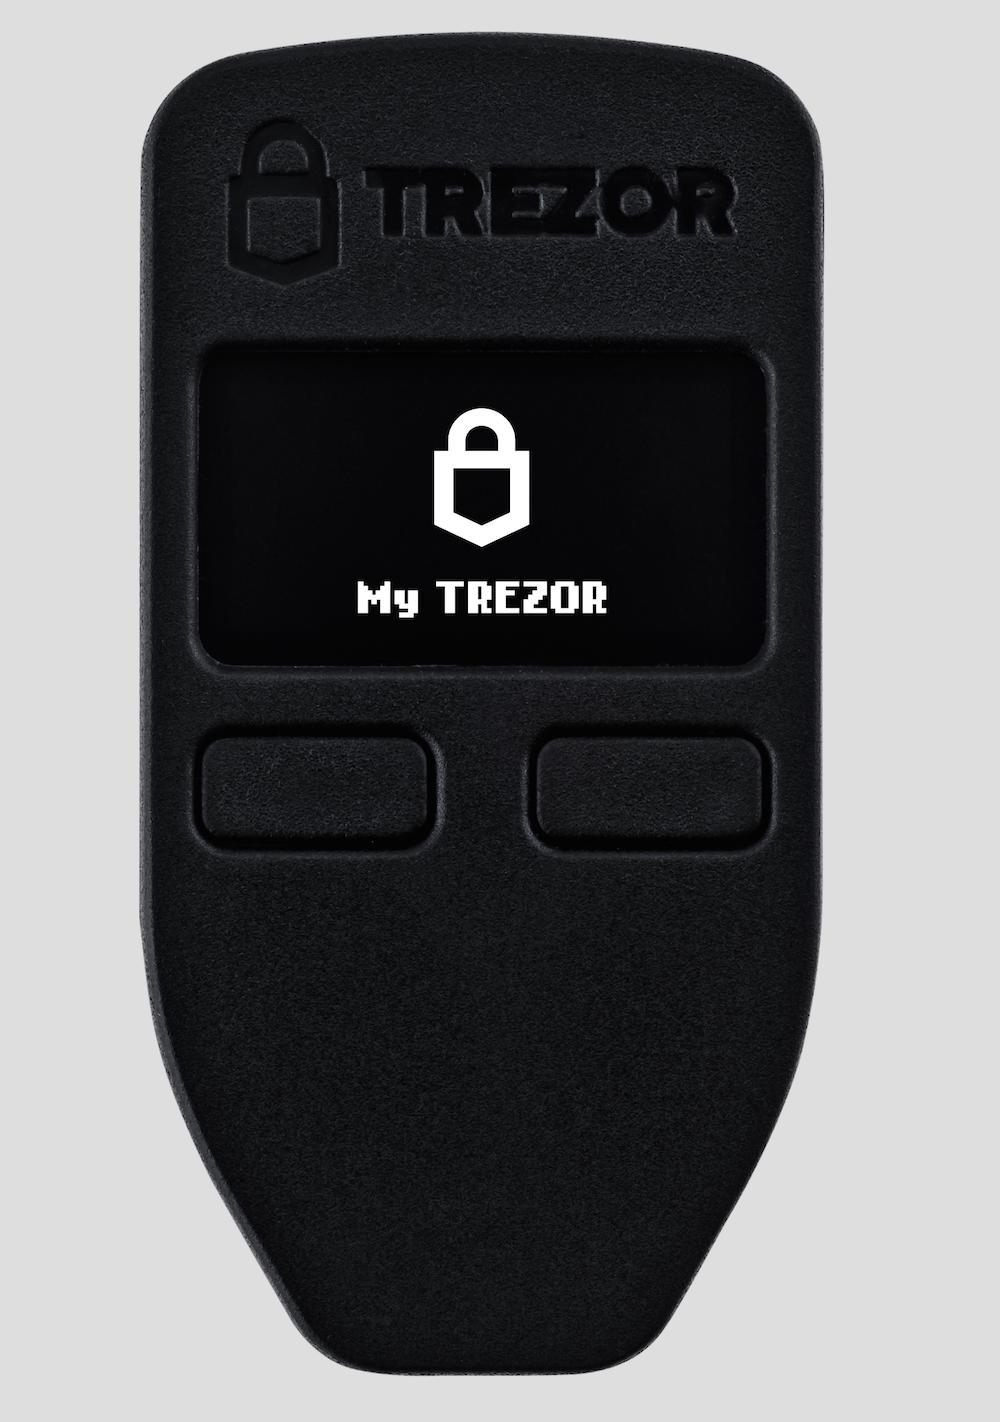 how to buy crypto with trezor wallet